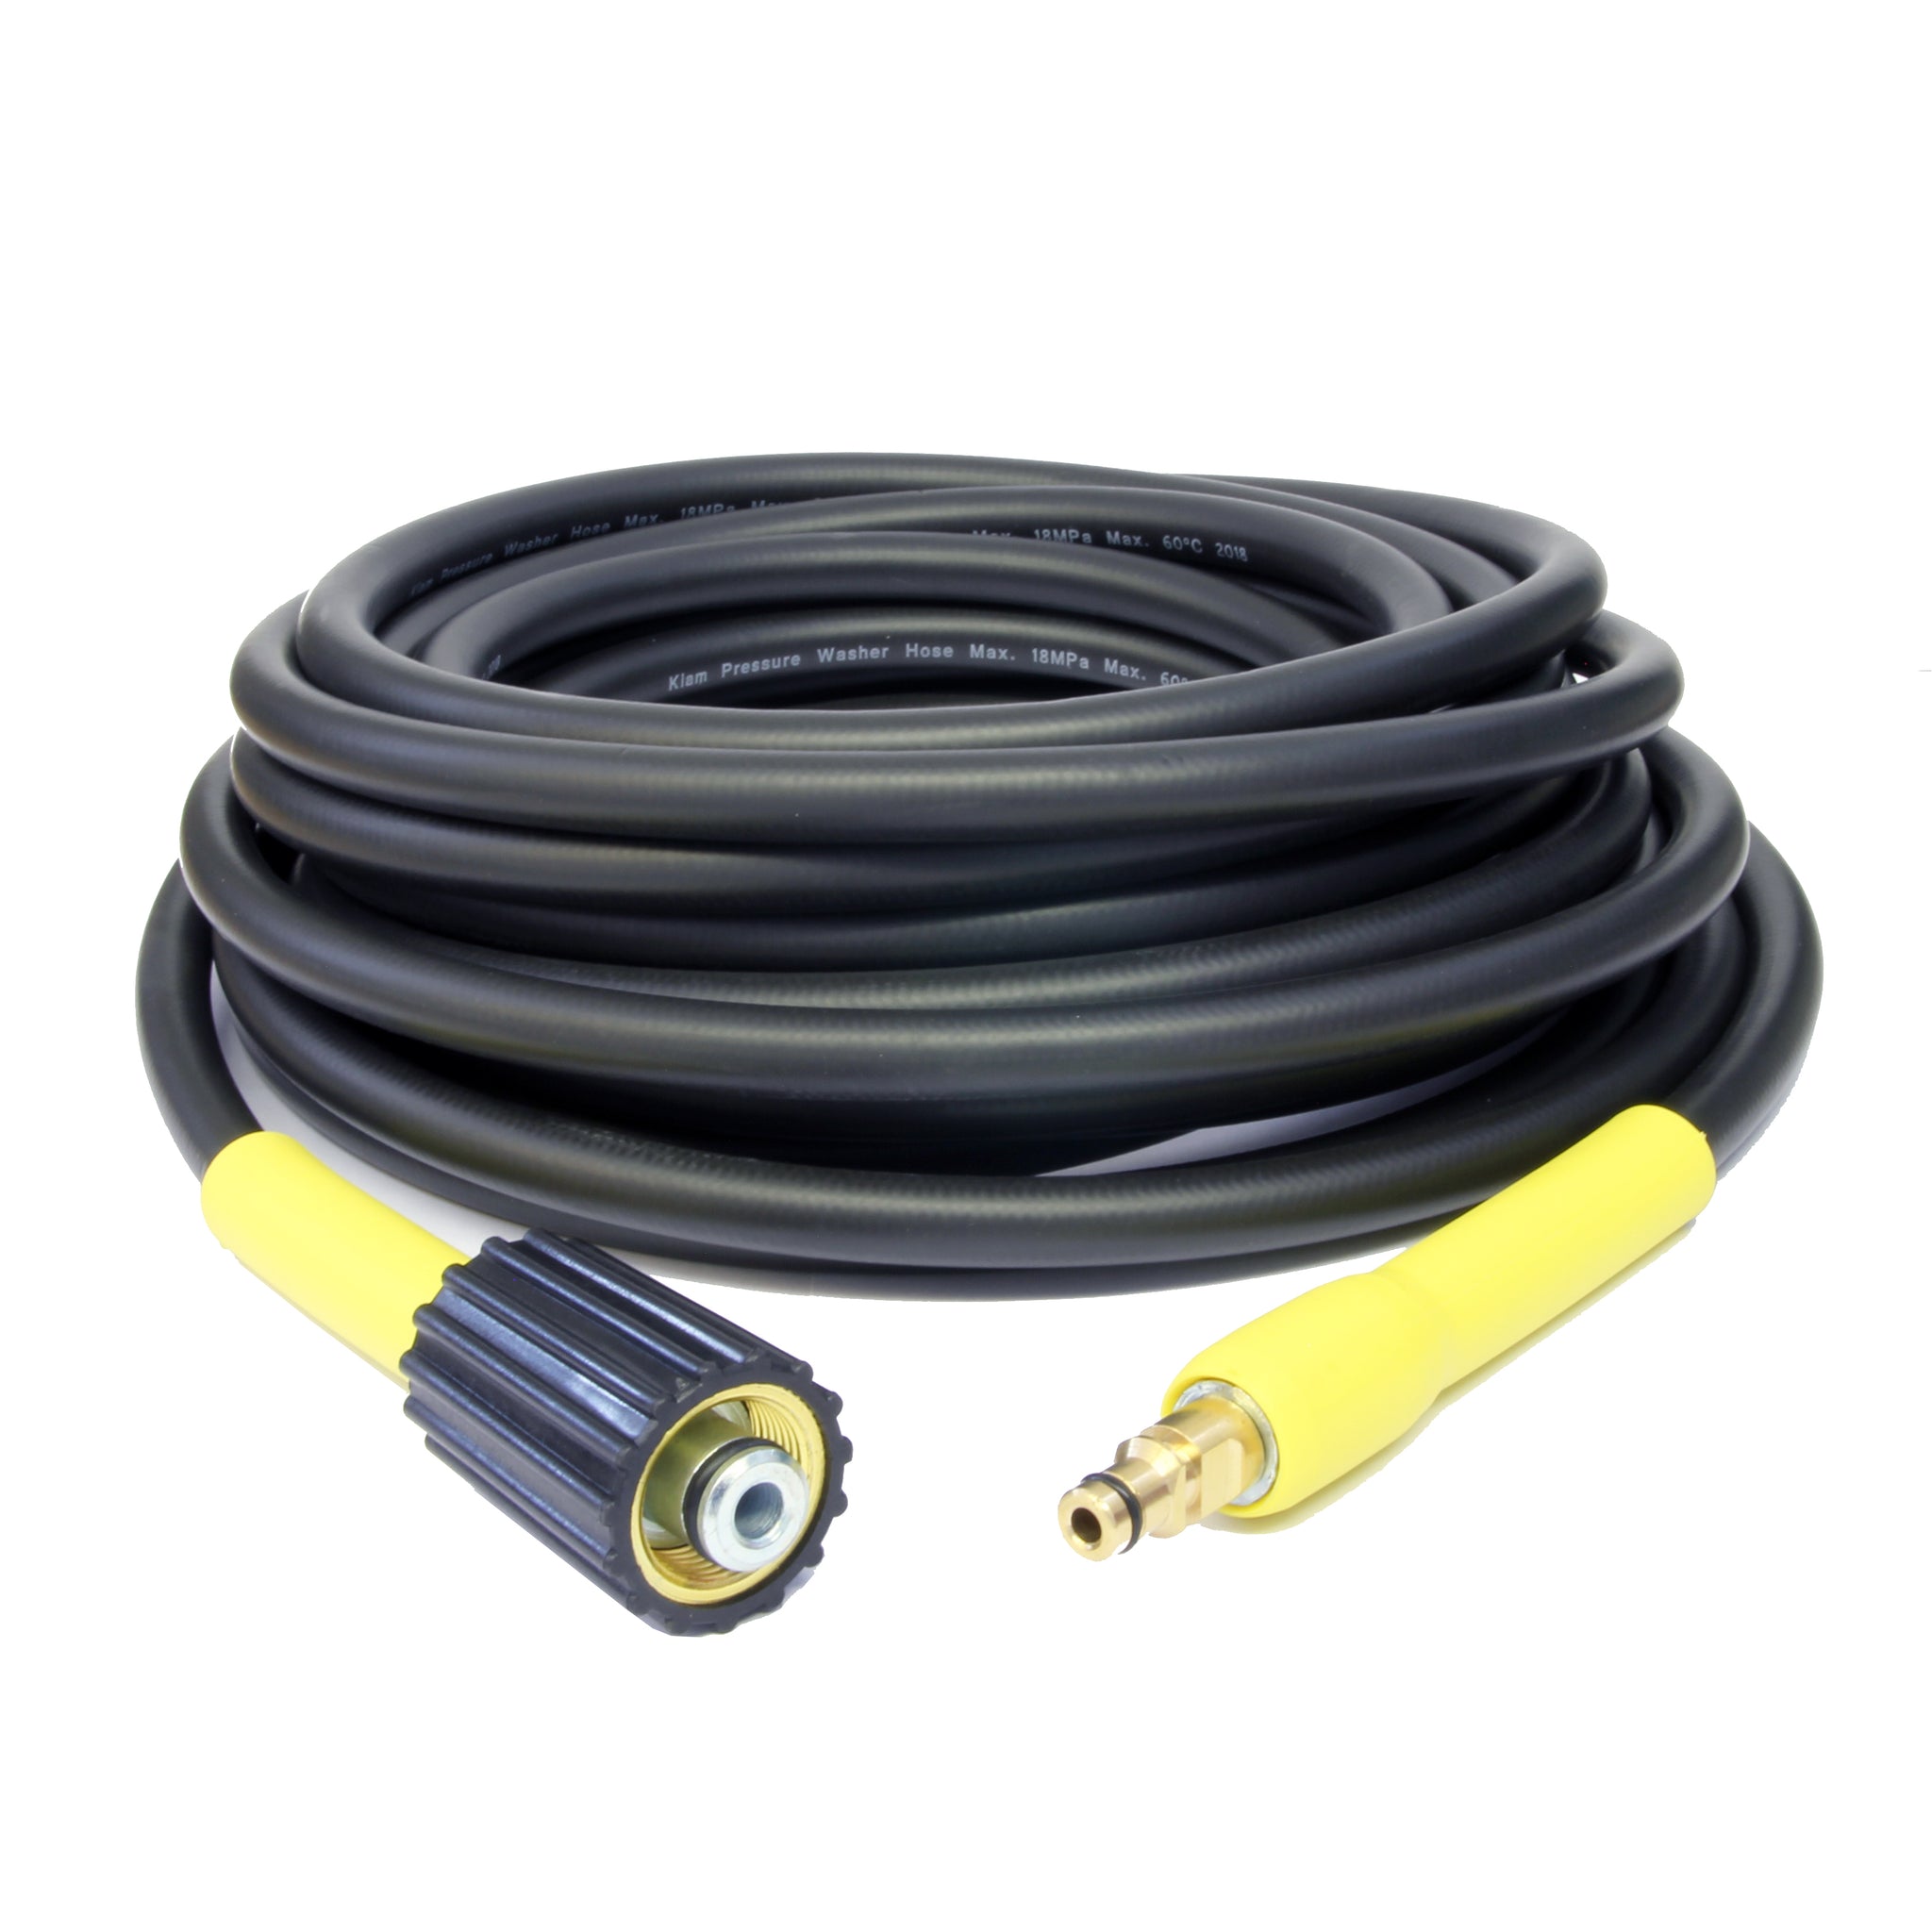 Karcher Flexible High Pressure Cleaning Washer Hose Set Yellow and Black, KARCHER, All Brands